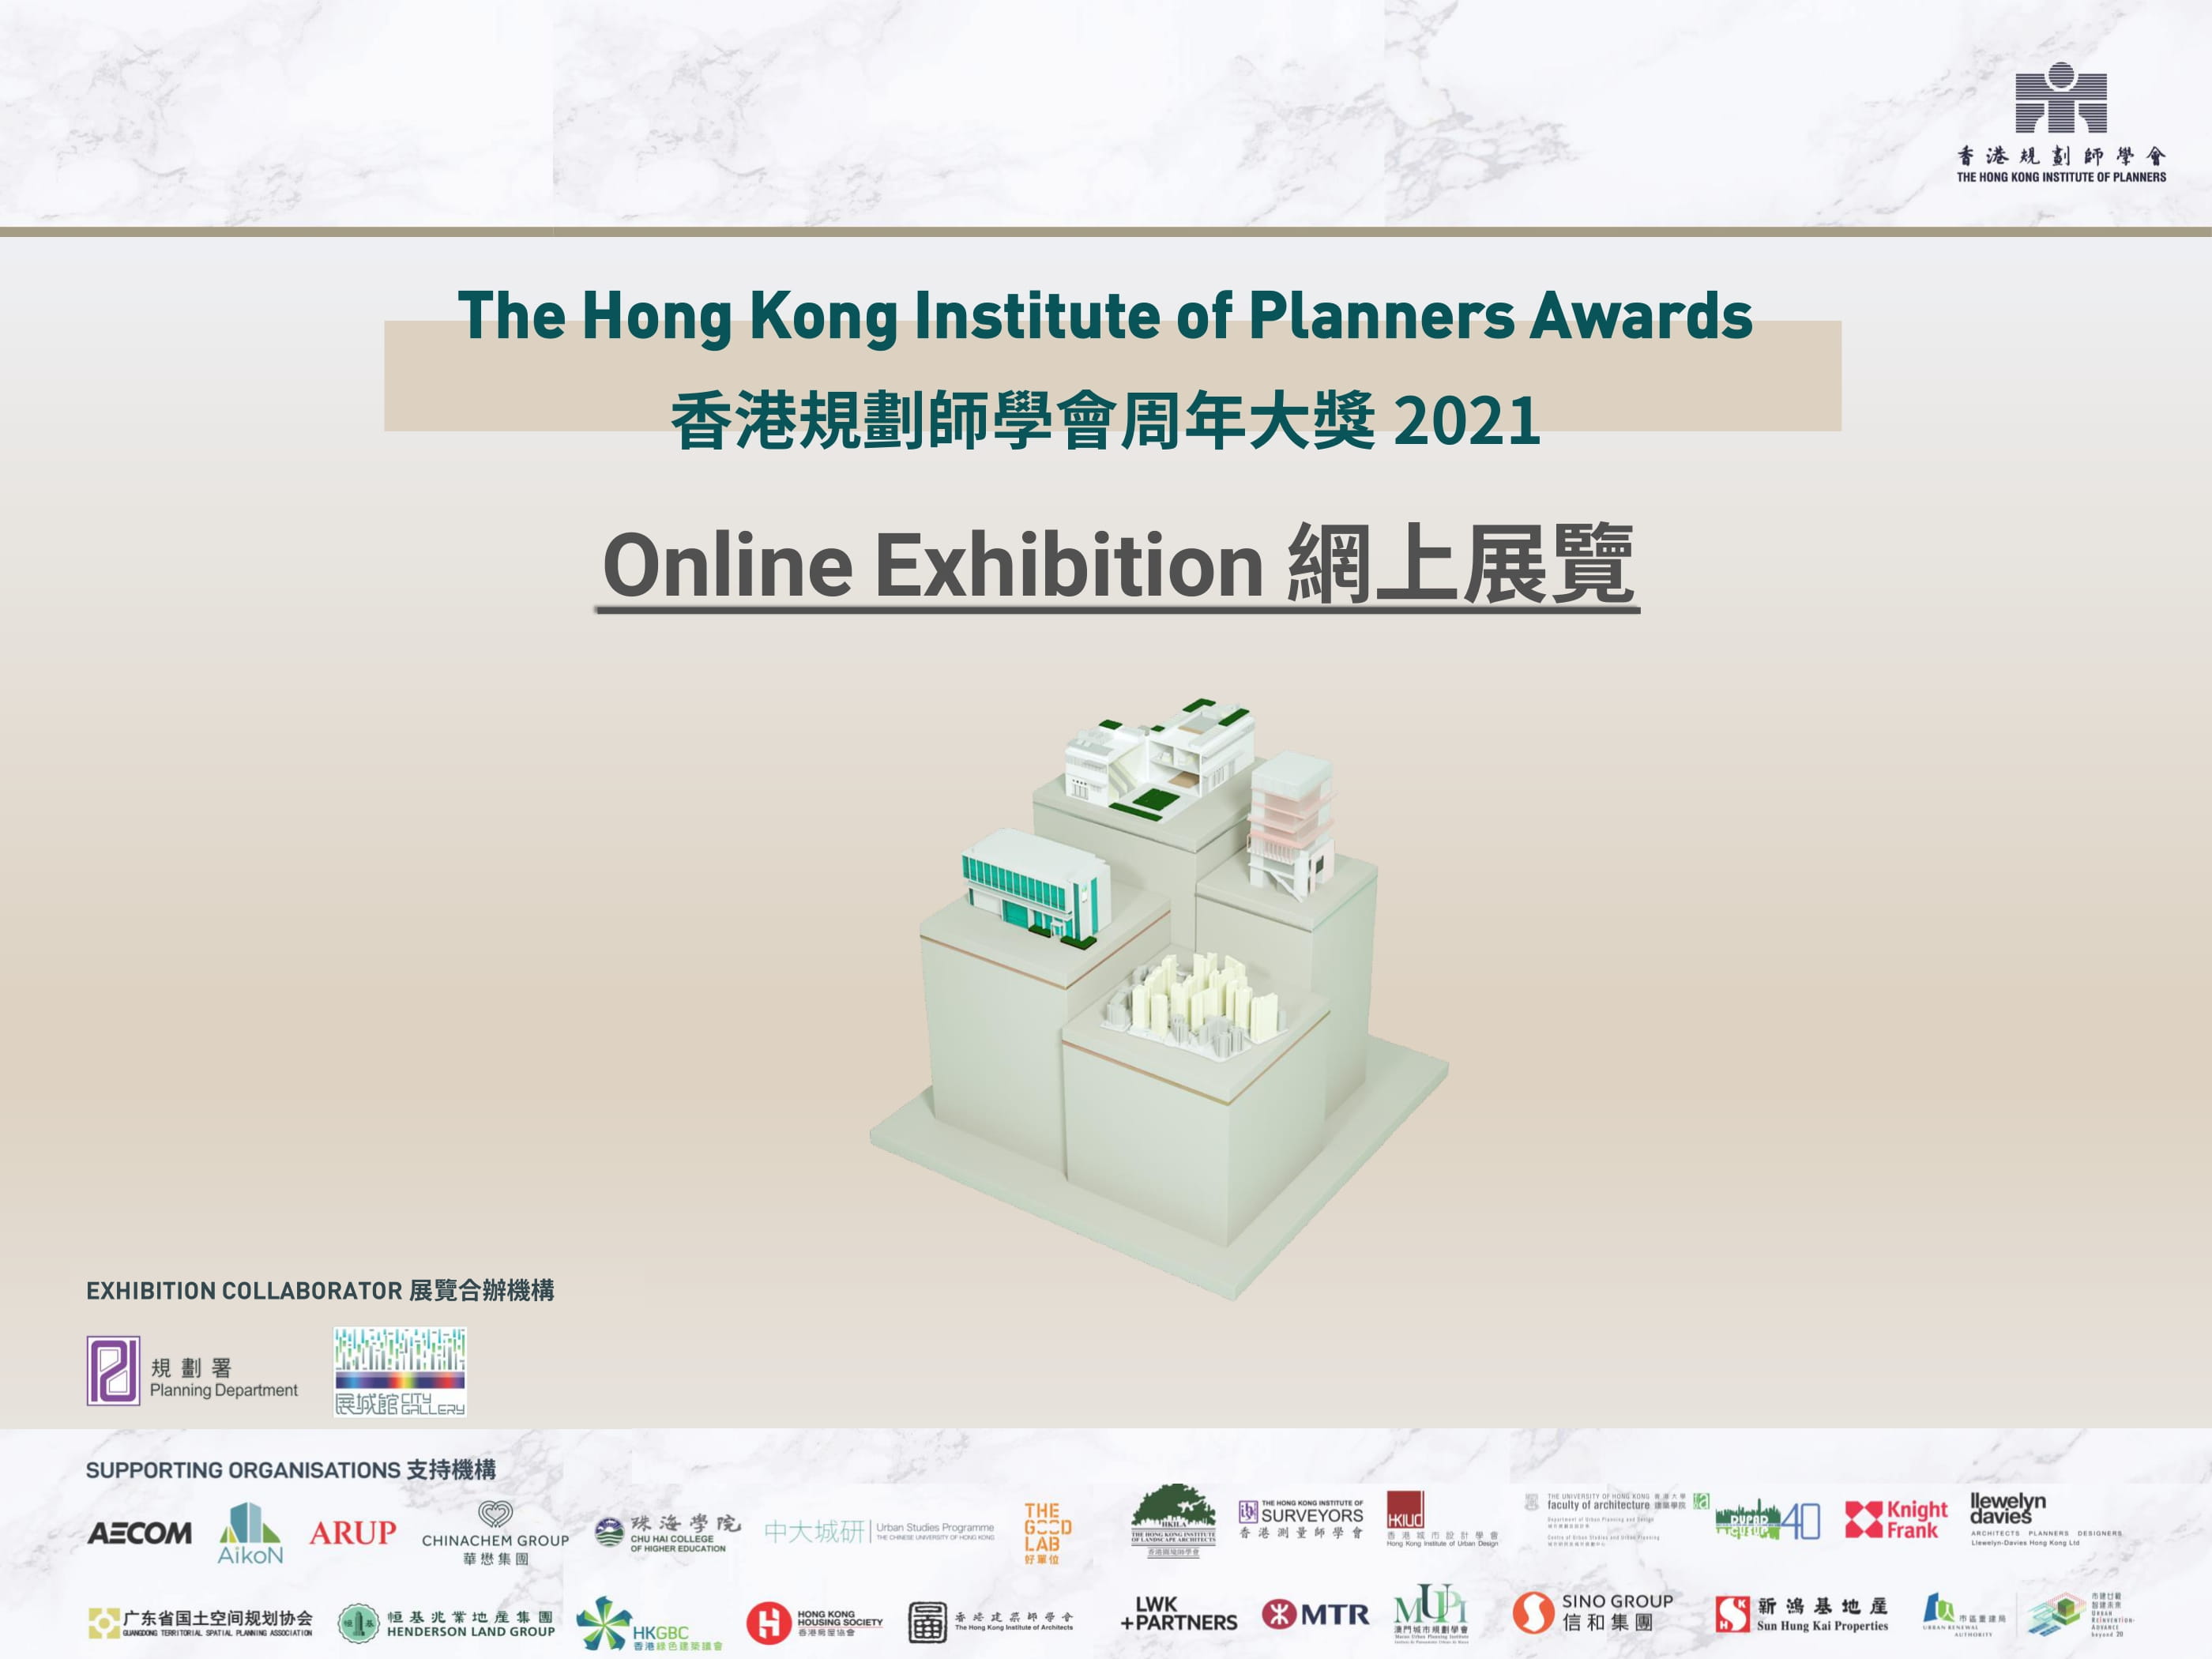 The Hong Kong Institute of Planners Awards 2021 Online Exhibition